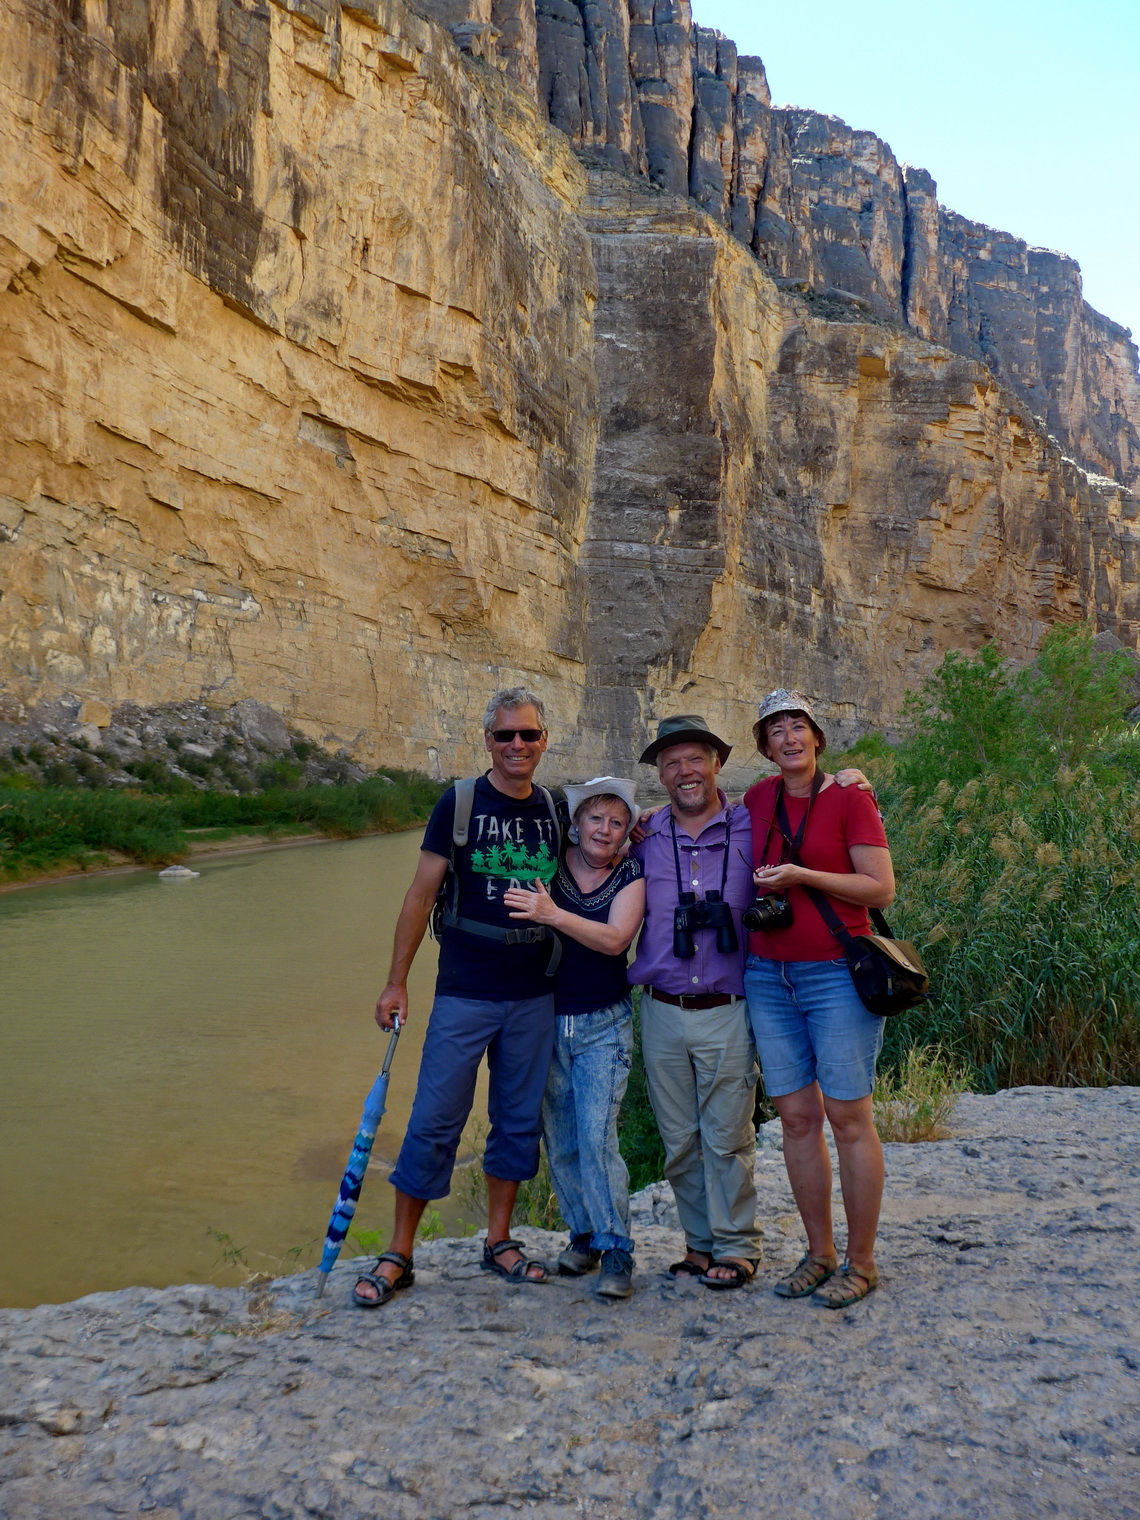 Alfred, Marion, Elmar and Ilse in the Santa Elena Canyon